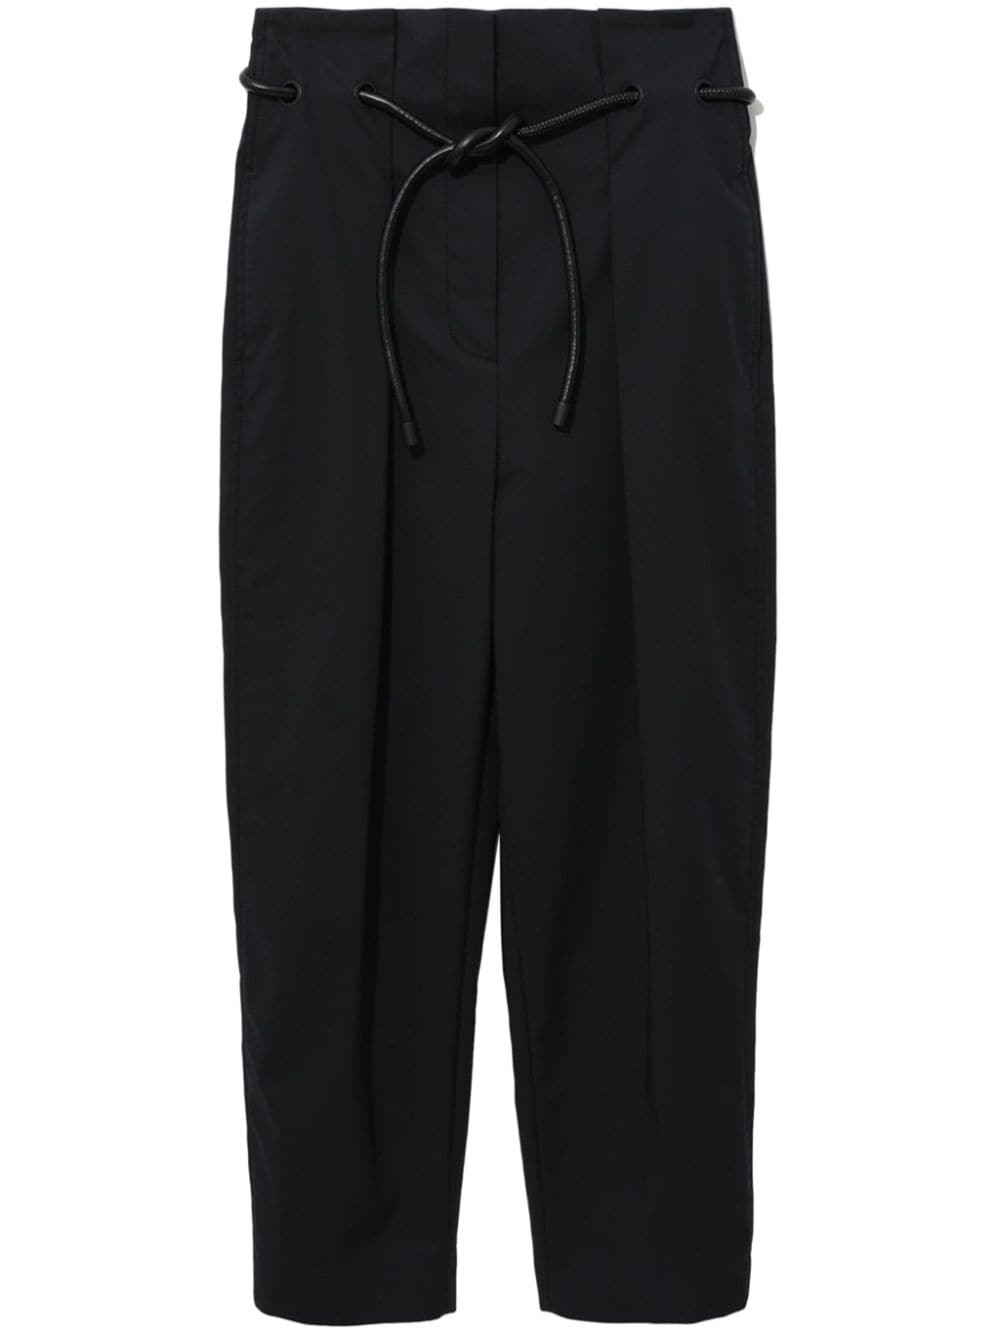 Image 1 of 3.1 Phillip Lim Origami pleated trousers